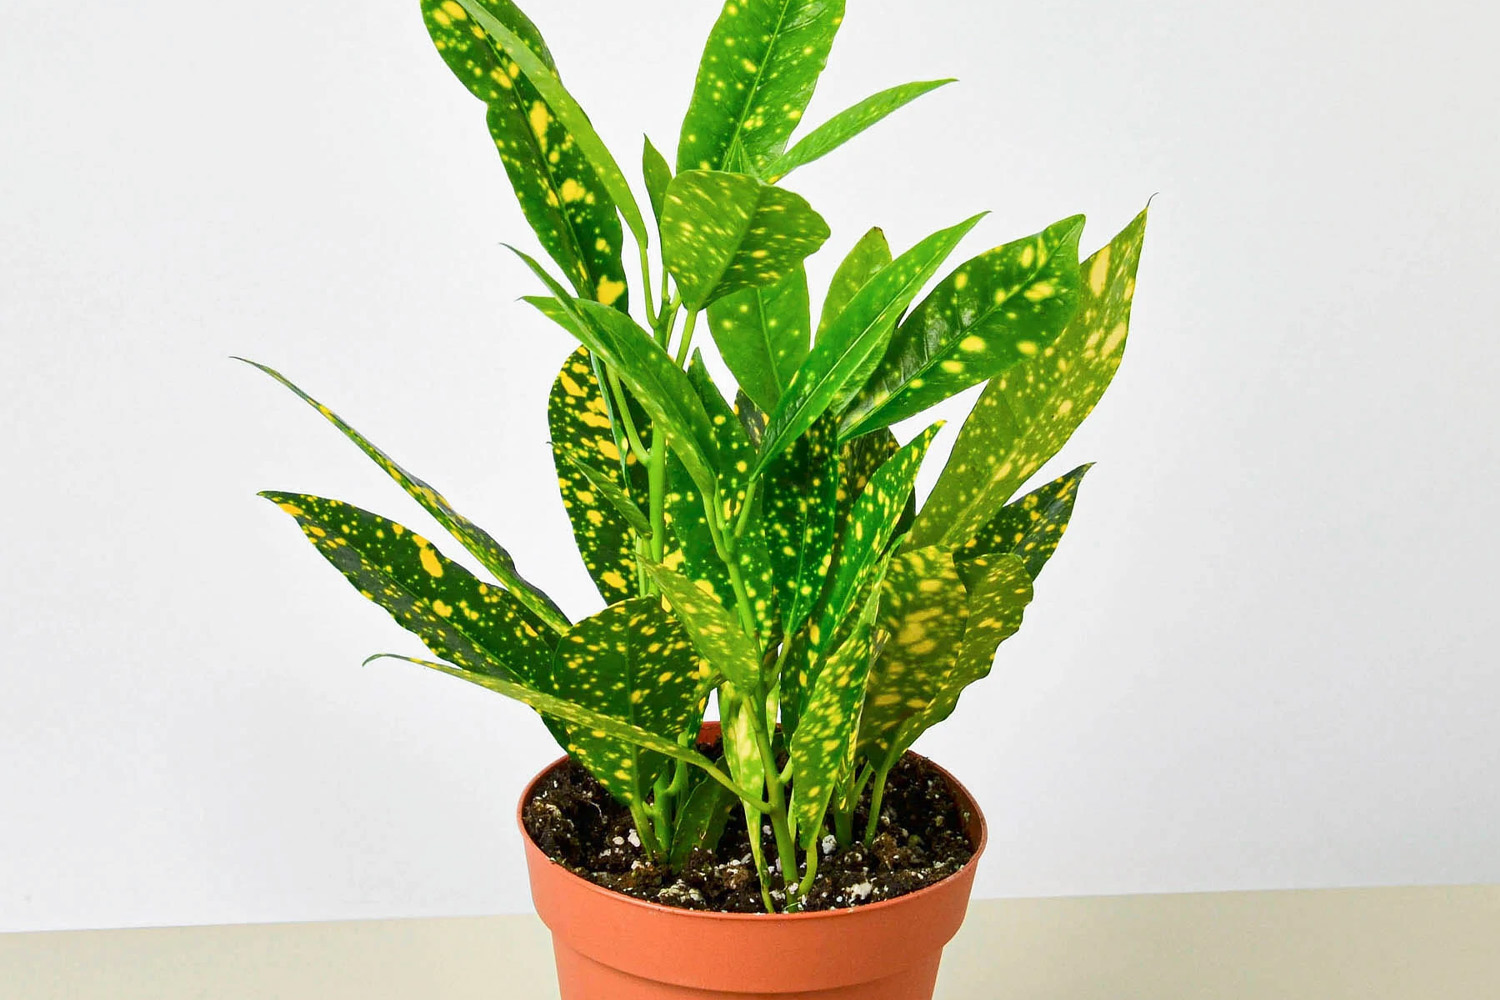 Gold Dust Croton Plant Care And Propagation Guide - The Home Tome